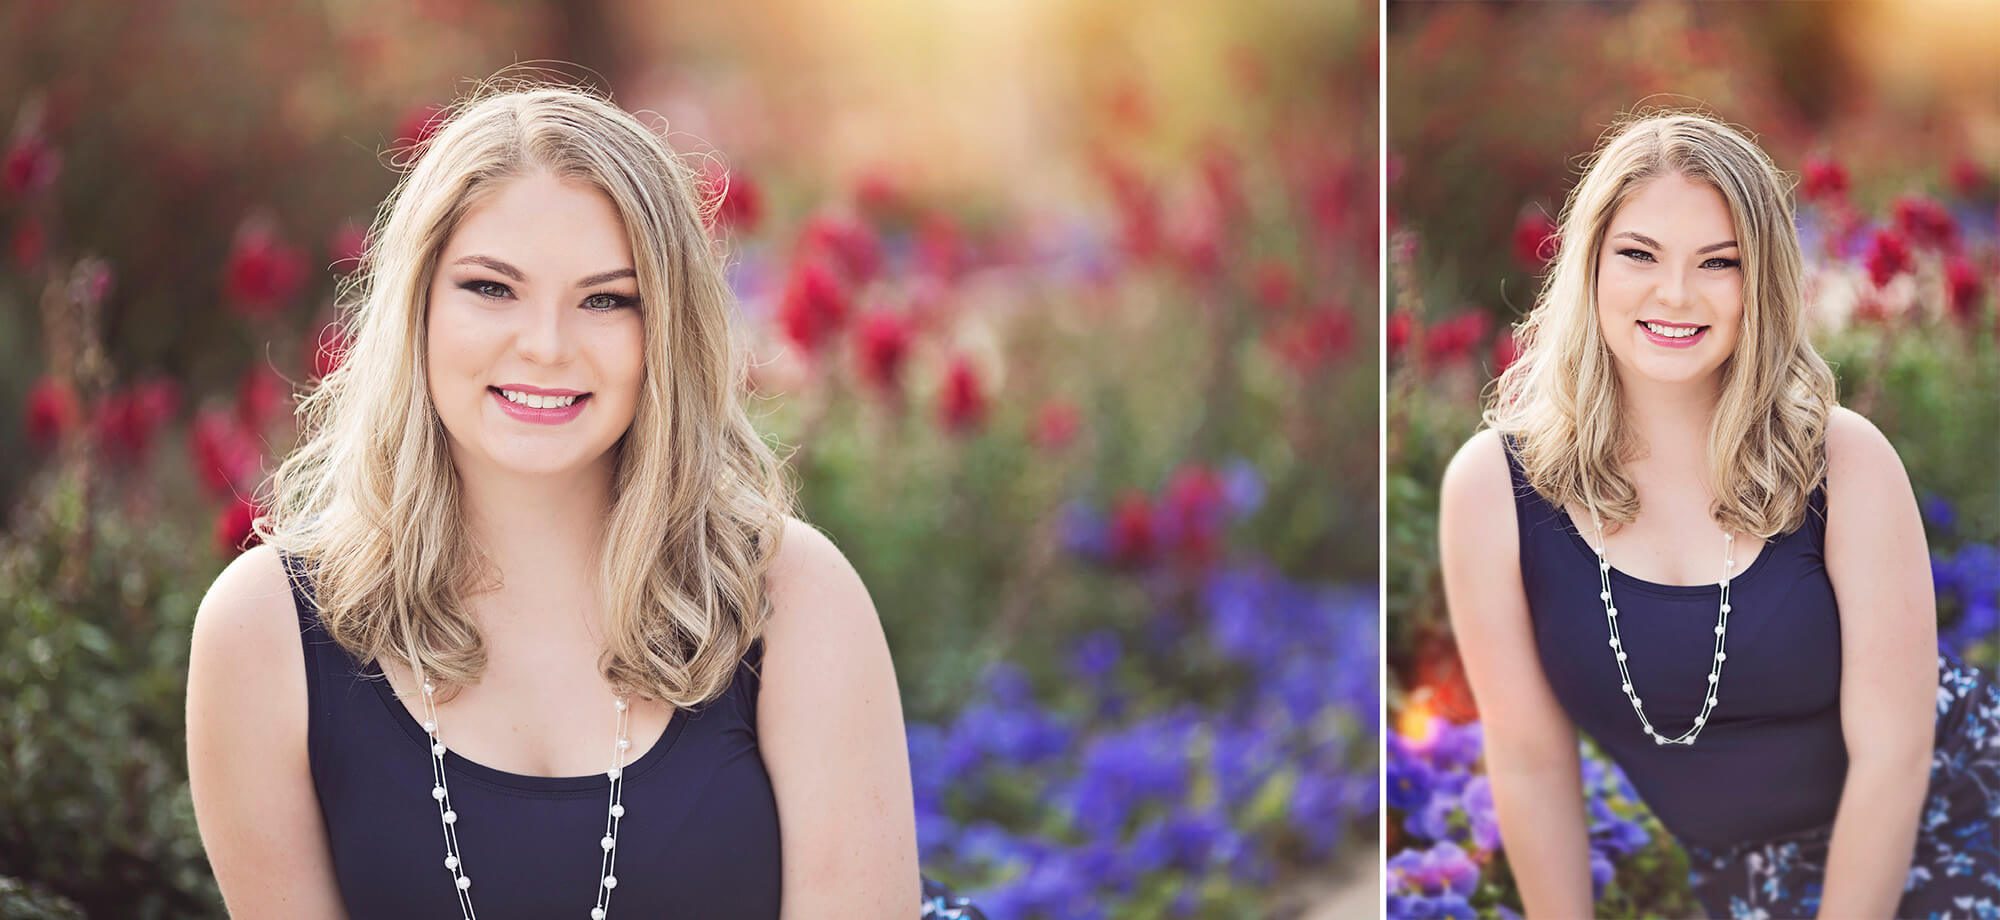 High school senior Olivia sits amongst the spring flowers at the University of Arizona during her senior portrait session